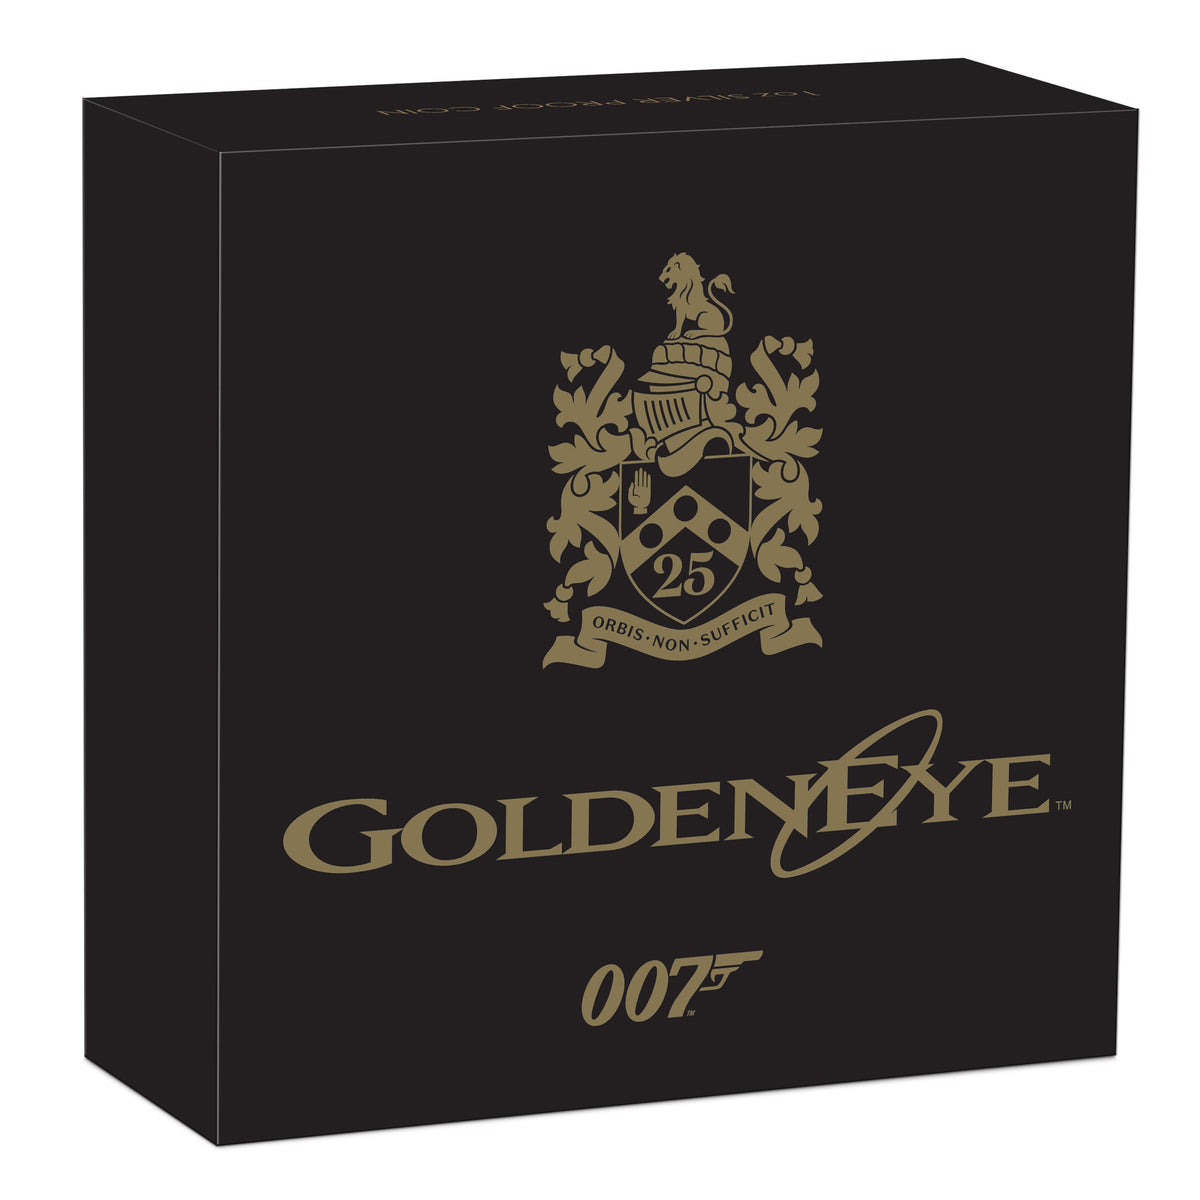 James Bond 1oz Silver Proof Coin - GoldenEye Numbered Edition - By The Perth Mint (Pre-order) Coins PERTH MINT 